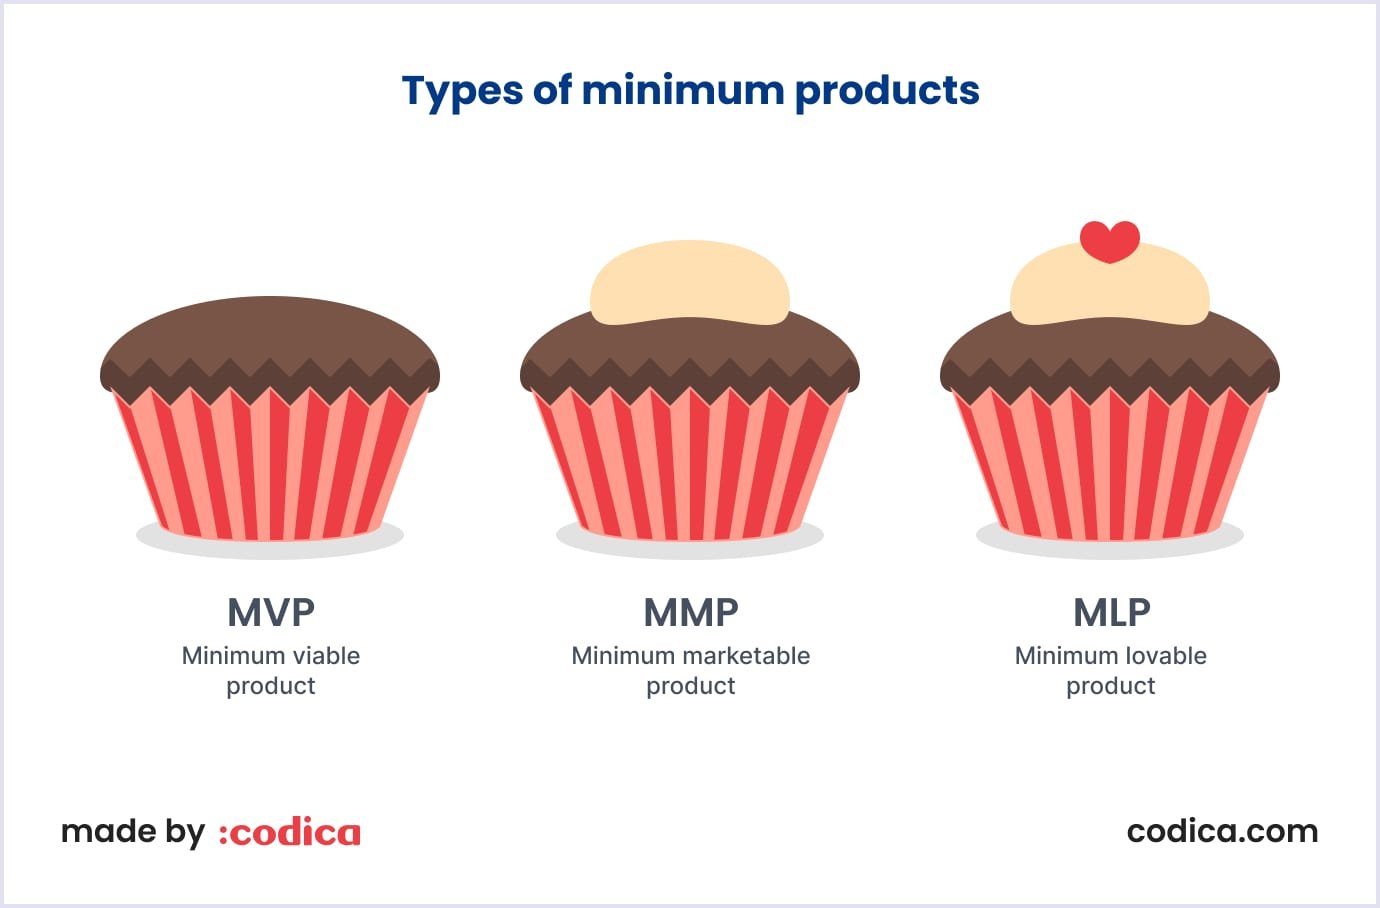 Different types of minimum products